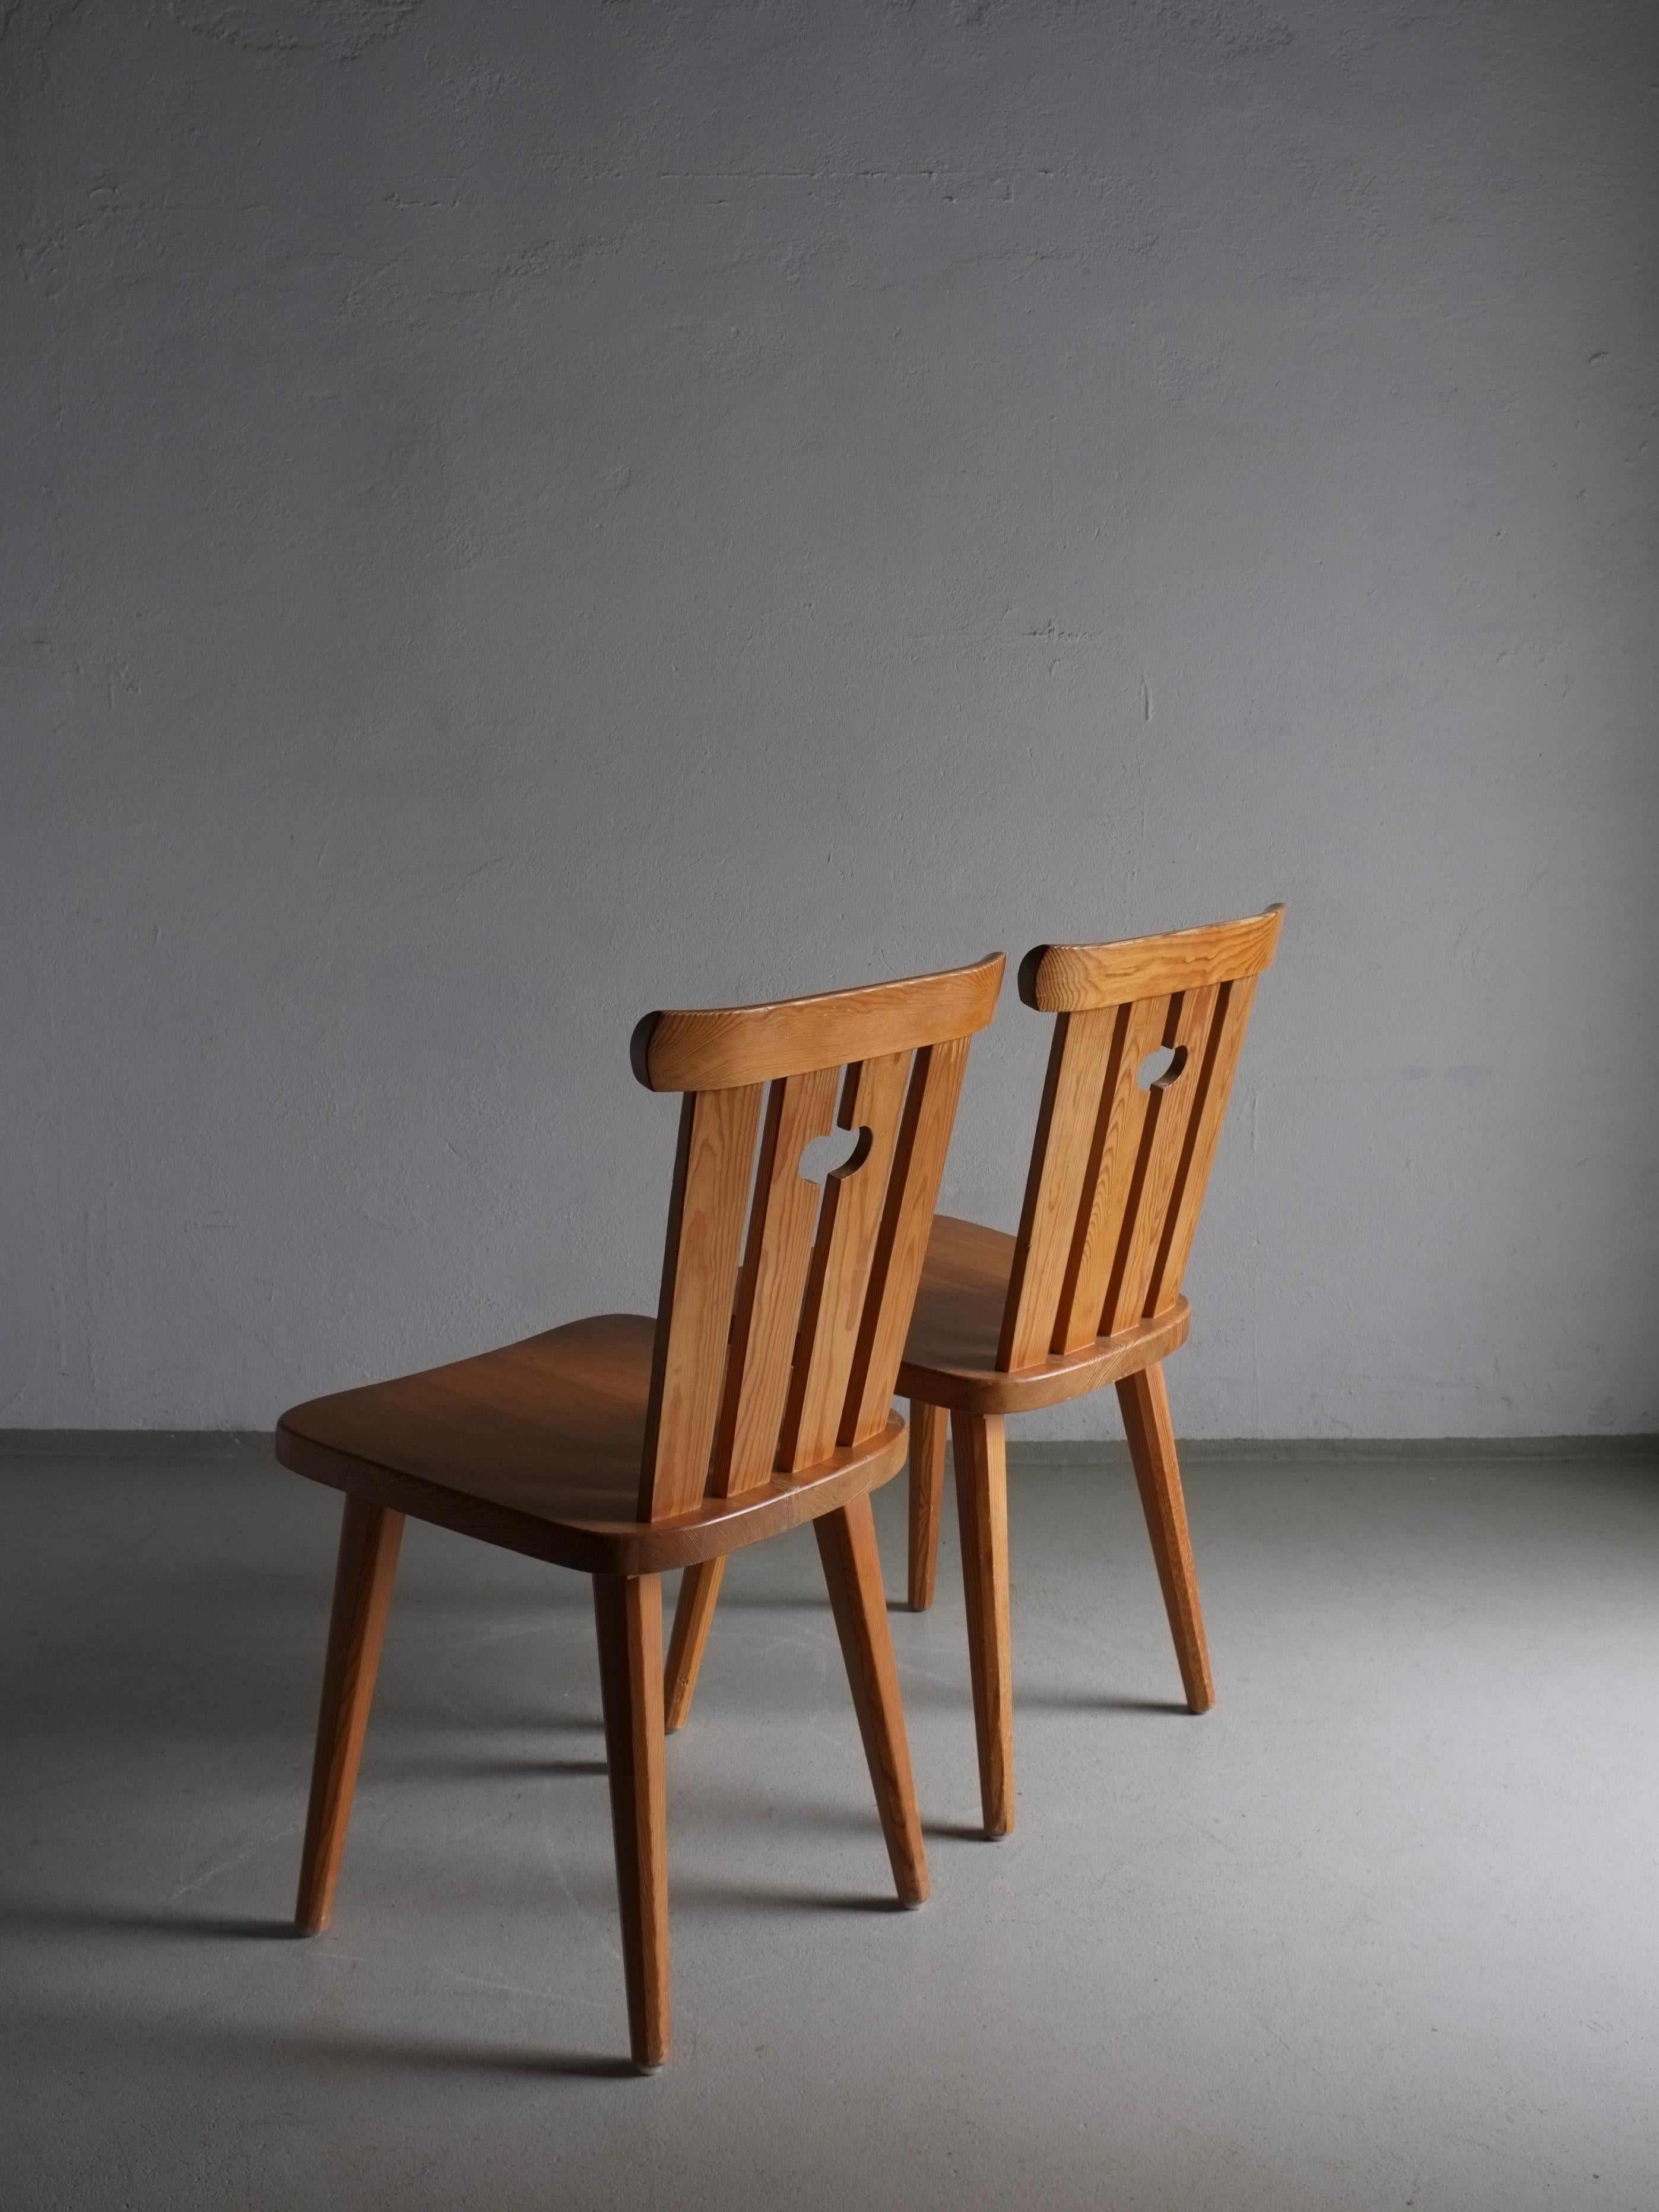 Rustic Set of 2 Solid Pine Chairs, Göran Malmvall, Sweden 1940s For Sale